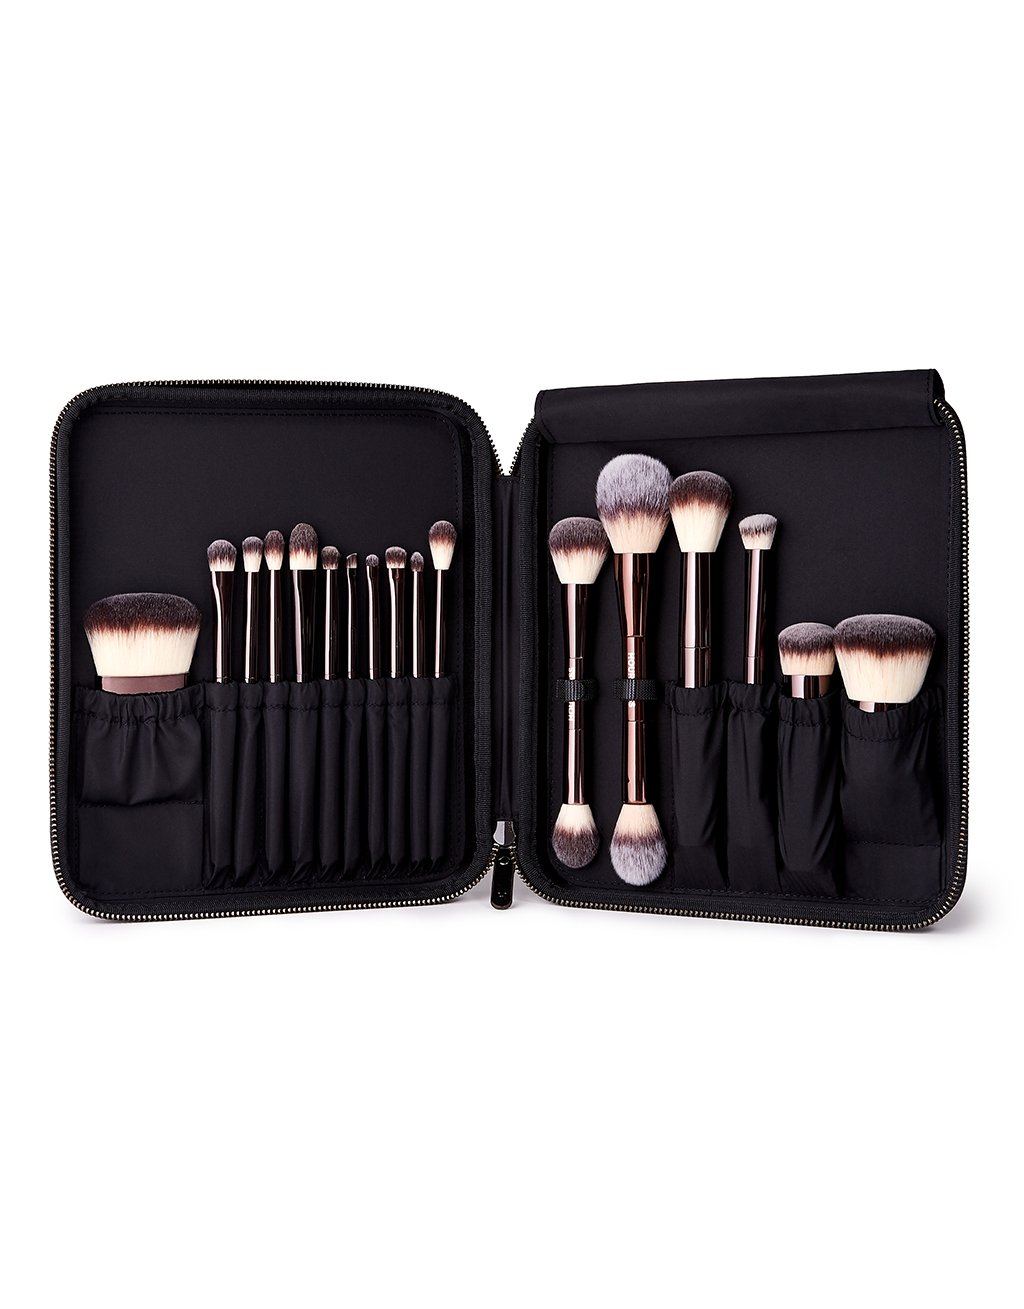 All Makeup Brushes & Sets